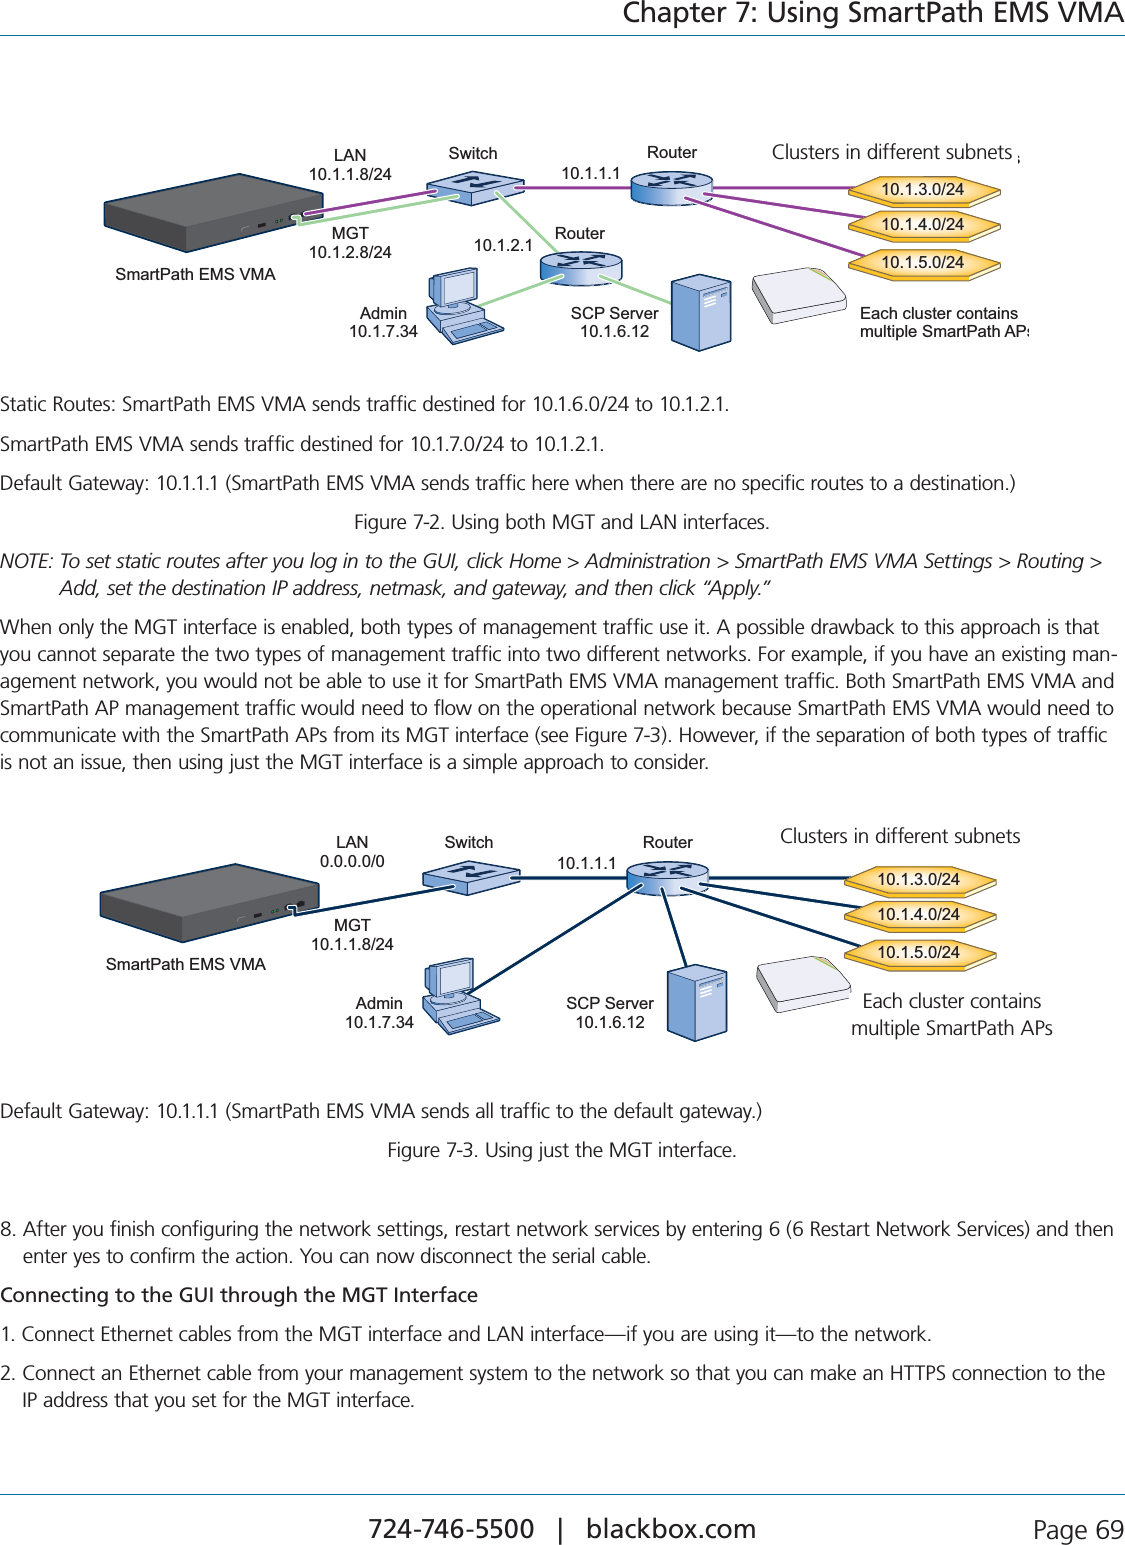 724-746-5500   |   blackbox.com  Page 69Chapter 7: Using SmartPath EMS VMAMGT10.1.2.8/24LAN10.1.1.8/24Switch Router Clusters in different subnetsRouter10.1.3.0/2410.1.4.0/2410.1.5.0/2410.1.1.110.1.2.1Admin10.1.7.34SCP Server 10.1.6.12SmartPath EMS VMAEach cluster contains multiple SmartPath APsClusters in different subnets3TATIC2OUTES3MART0ATH%-36-!SENDSTRAFFICDESTINEDFOR  TO 3MART0ATH%-36-!SENDSTRAFFICDESTINEDFORTO$EFAULT&apos;ATEWAY3MART0ATH%-36-!SENDSTRAFFICHEREWHENTHEREARENOSPECIFICROUTESTOADESTINATIONFigure 7-2. Using both MGT and LAN interfaces.NOTE:  To set static routes after you log in to the GUI, click Home &gt; Administration &gt; SmartPath EMS VMA Settings &gt; Routing &gt; Add, set the destination IP address, netmask, and gateway, and then click “Apply.”When only the MGT interface is enabled, both types of management traffic use it. A possible drawback to this approach is that you cannot separate the two types of management traffic into two different networks. For example, if you have an existing man-AGEMENTNETWORKYOUWOULDNOTBEABLETOUSEITFOR3MART0ATH%-36-!MANAGEMENTTRAFFIC&quot;OTH3MART0ATH%-36-!AND3MART0ATH!0MANAGEMENTTRAFFICWOULDNEEDTOFLOWONTHEOPERATIONALNETWORKBECAUSE3MART0ATH%-36-!WOULDNEEDTOcommunicate with the SmartPath APs from its MGT interface (see Figure 7-3). However, if the separation of both types of traffic is not an issue, then using just the MGT interface is a simple approach to consider.MGT10.1.1.8/24LAN0.0.0.0/0Switch Router Clusters in different subnets10.1.3.0/2410.1.4.0/2410.1.5.0/2410.1.1.1Admin10.1.7.34SCP Server 10.1.6.12SmartPath EMS VMAEach cluster contains multiple SmartPath APs.Each cluster contains multiple SmartPath APsClusters in different subnets$EFAULT&apos;ATEWAY3MART0ATH%-36-!SENDSALLTRAFFICTOTHEDEFAULTGATEWAYFigure 7-3. Using just the MGT interface.8.  After you finish configuring the network settings, restart network services by entering 6 (6 Restart Network Services) and then enter yes to confirm the action. You can now disconnect the serial cable.Connecting to the GUI through the MGT Interface1. Connect Ethernet cables from the MGT interface and LAN interface—if you are using it—to the network.2.  Connect an Ethernet cable from your management system to the network so that you can make an HTTPS connection to the IP address that you set for the MGT interface.